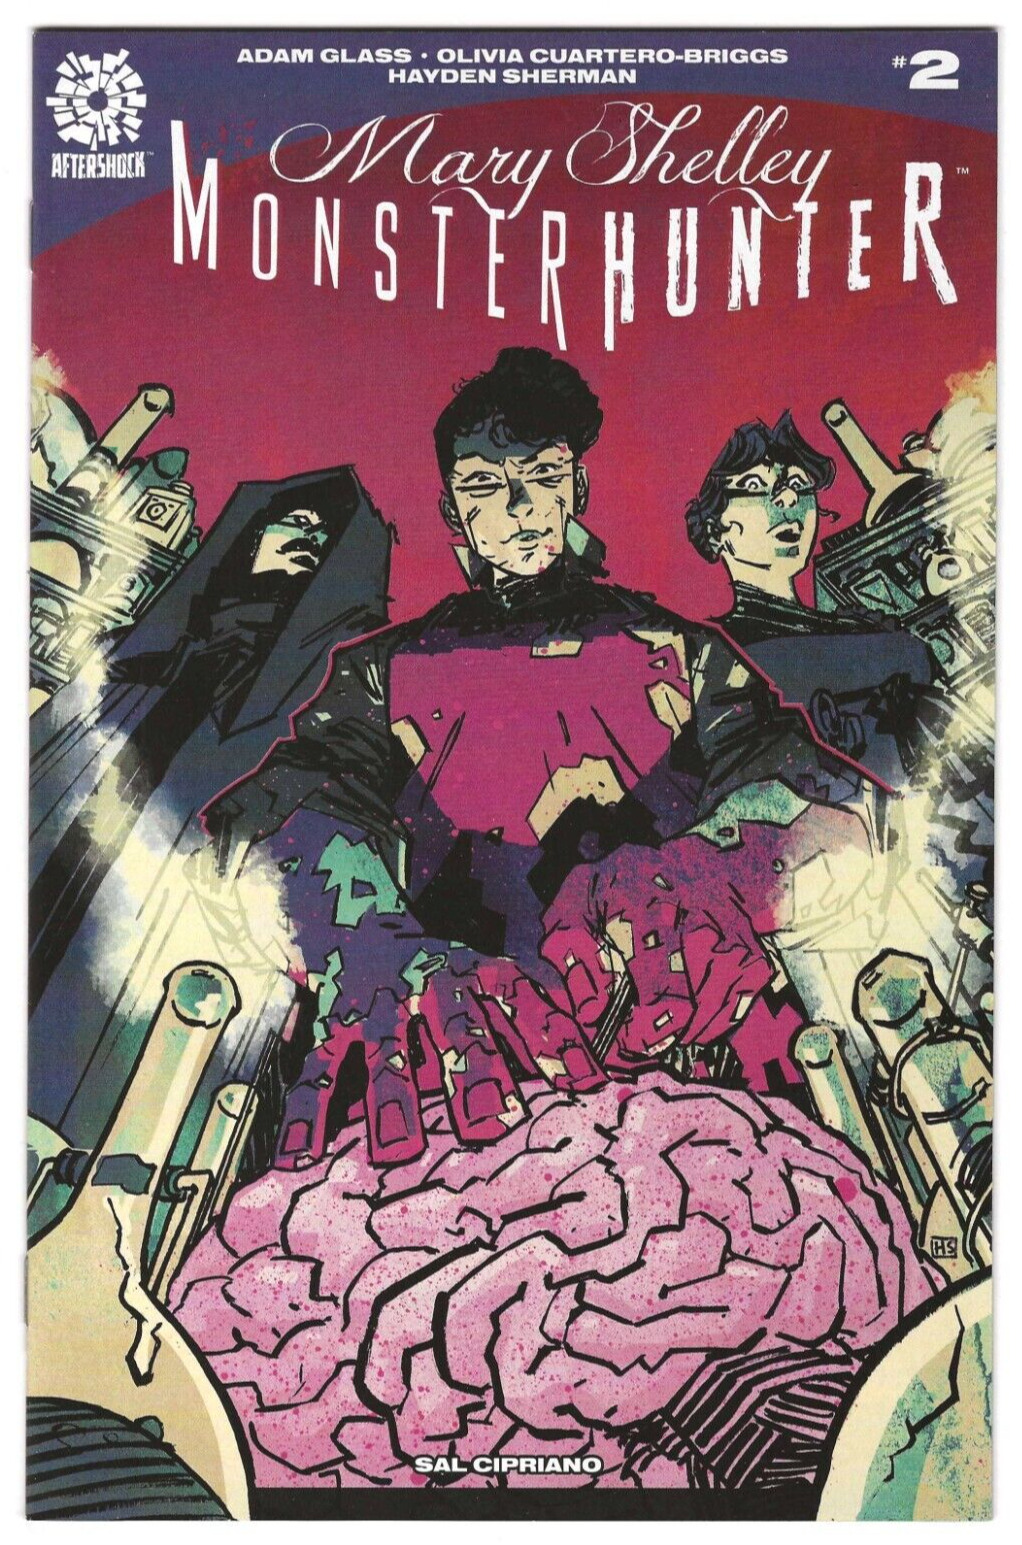 Aftershock Comics MARY SHELLY MONSTER HUNTER #2 first printing cover A